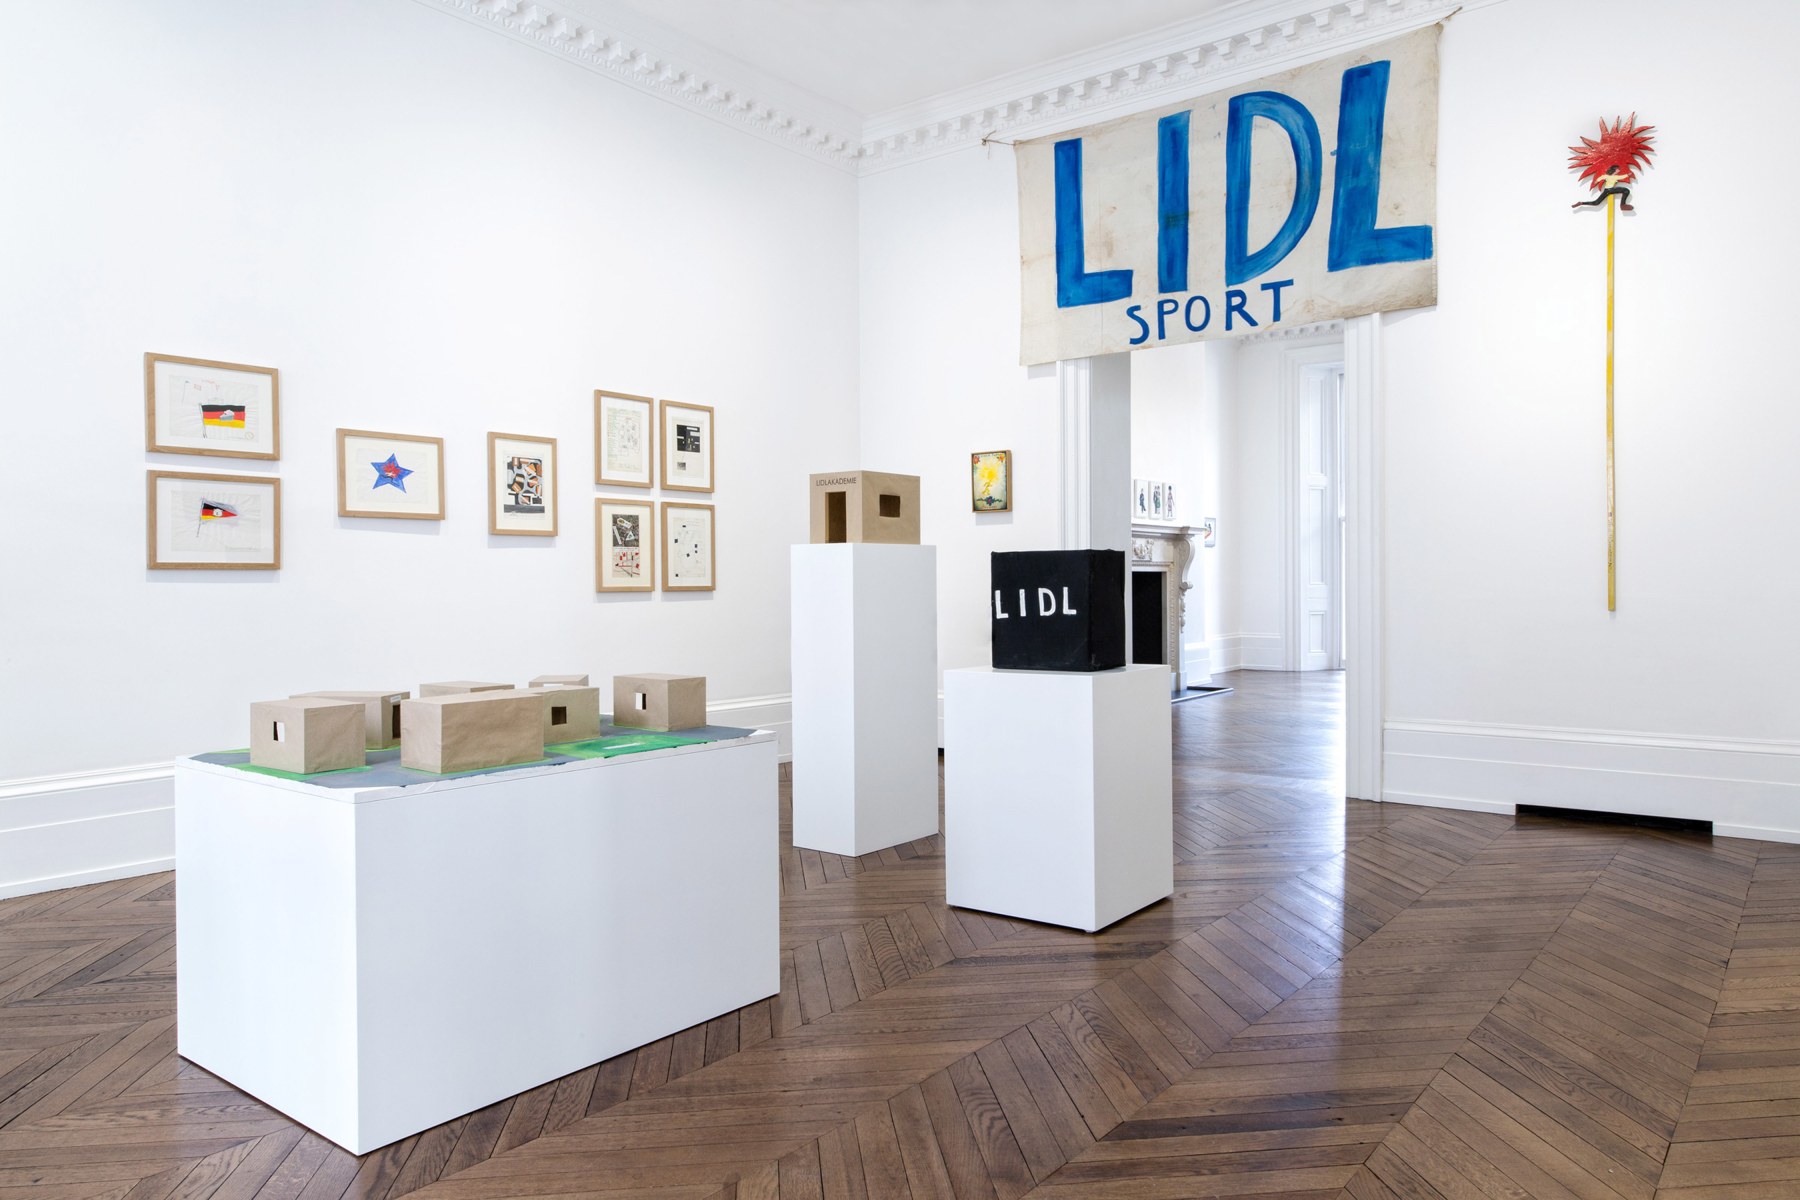 J&Ouml;RG IMMENDORFF LIDL Works and Performances from the 60s and Late Paintings after Hogarth 12 May through 2 July 2016 MAYFAIR, LONDON, Installation View 4